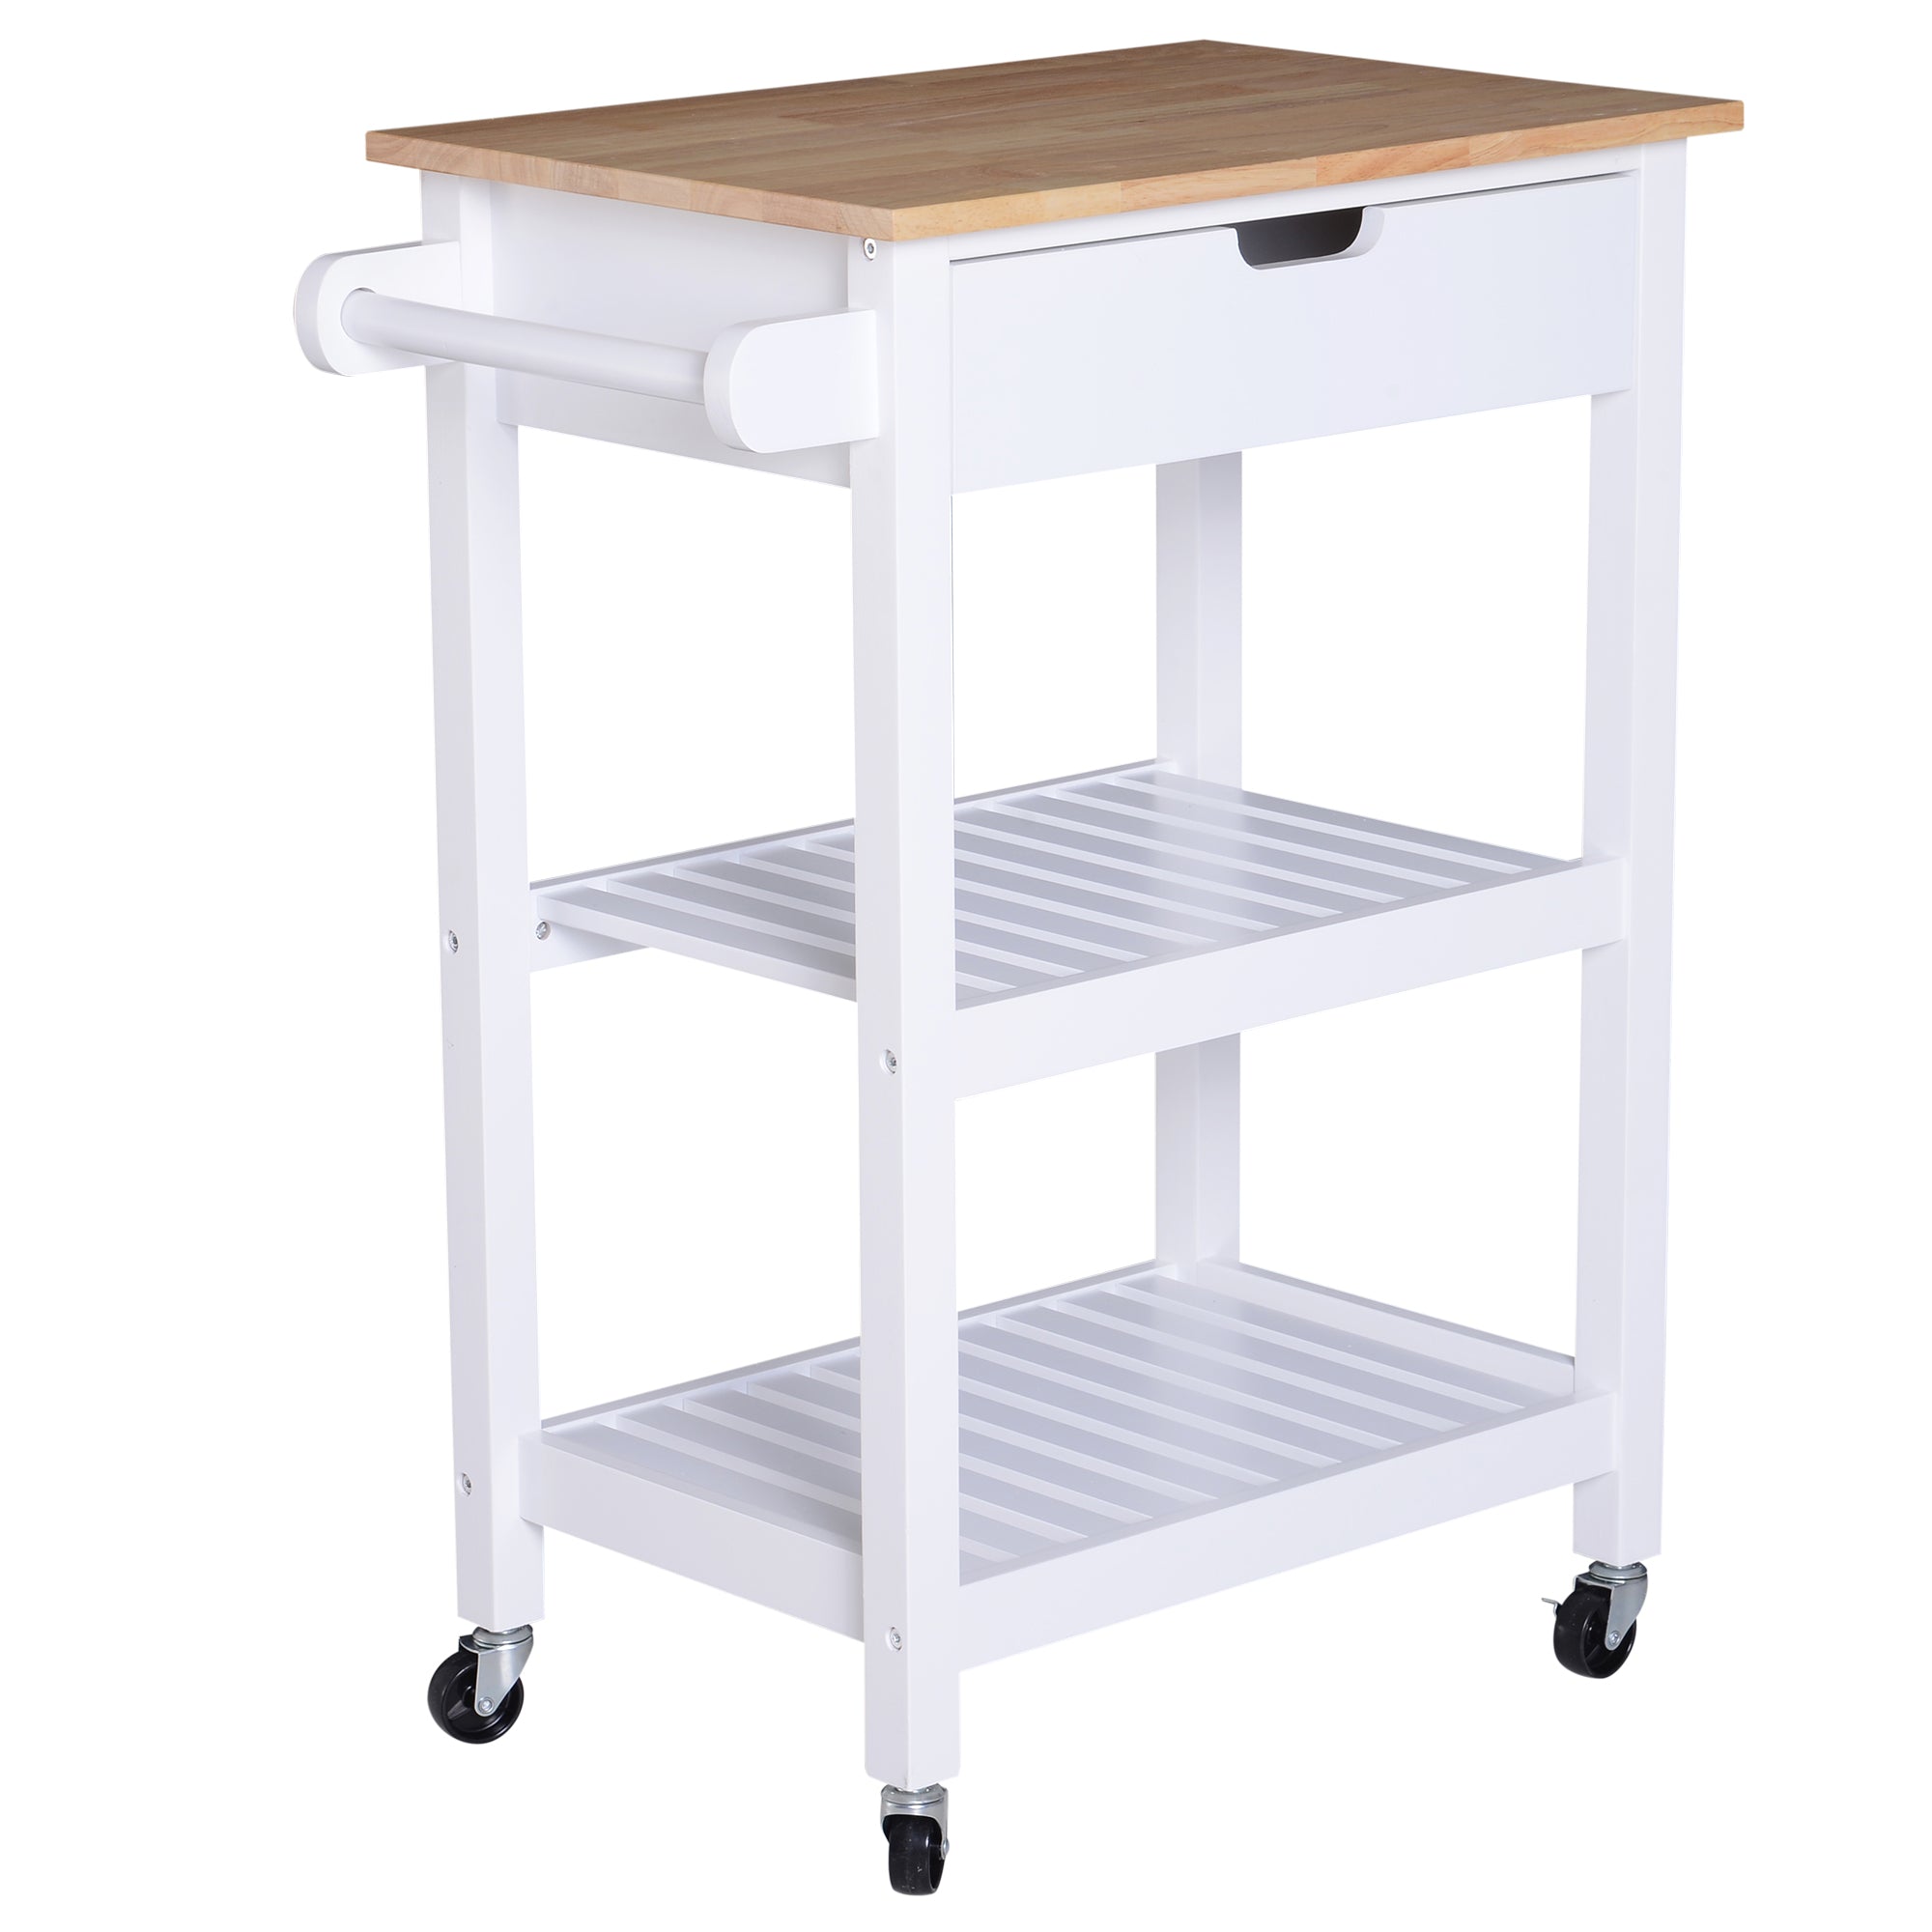 Nancy's Wooster Kitchen trolley - Serving trolley - Kitchen trolley - Drawer - Shelves - Handle - Wood - 64 x 39 x 84.5 cm - White - Natural Color